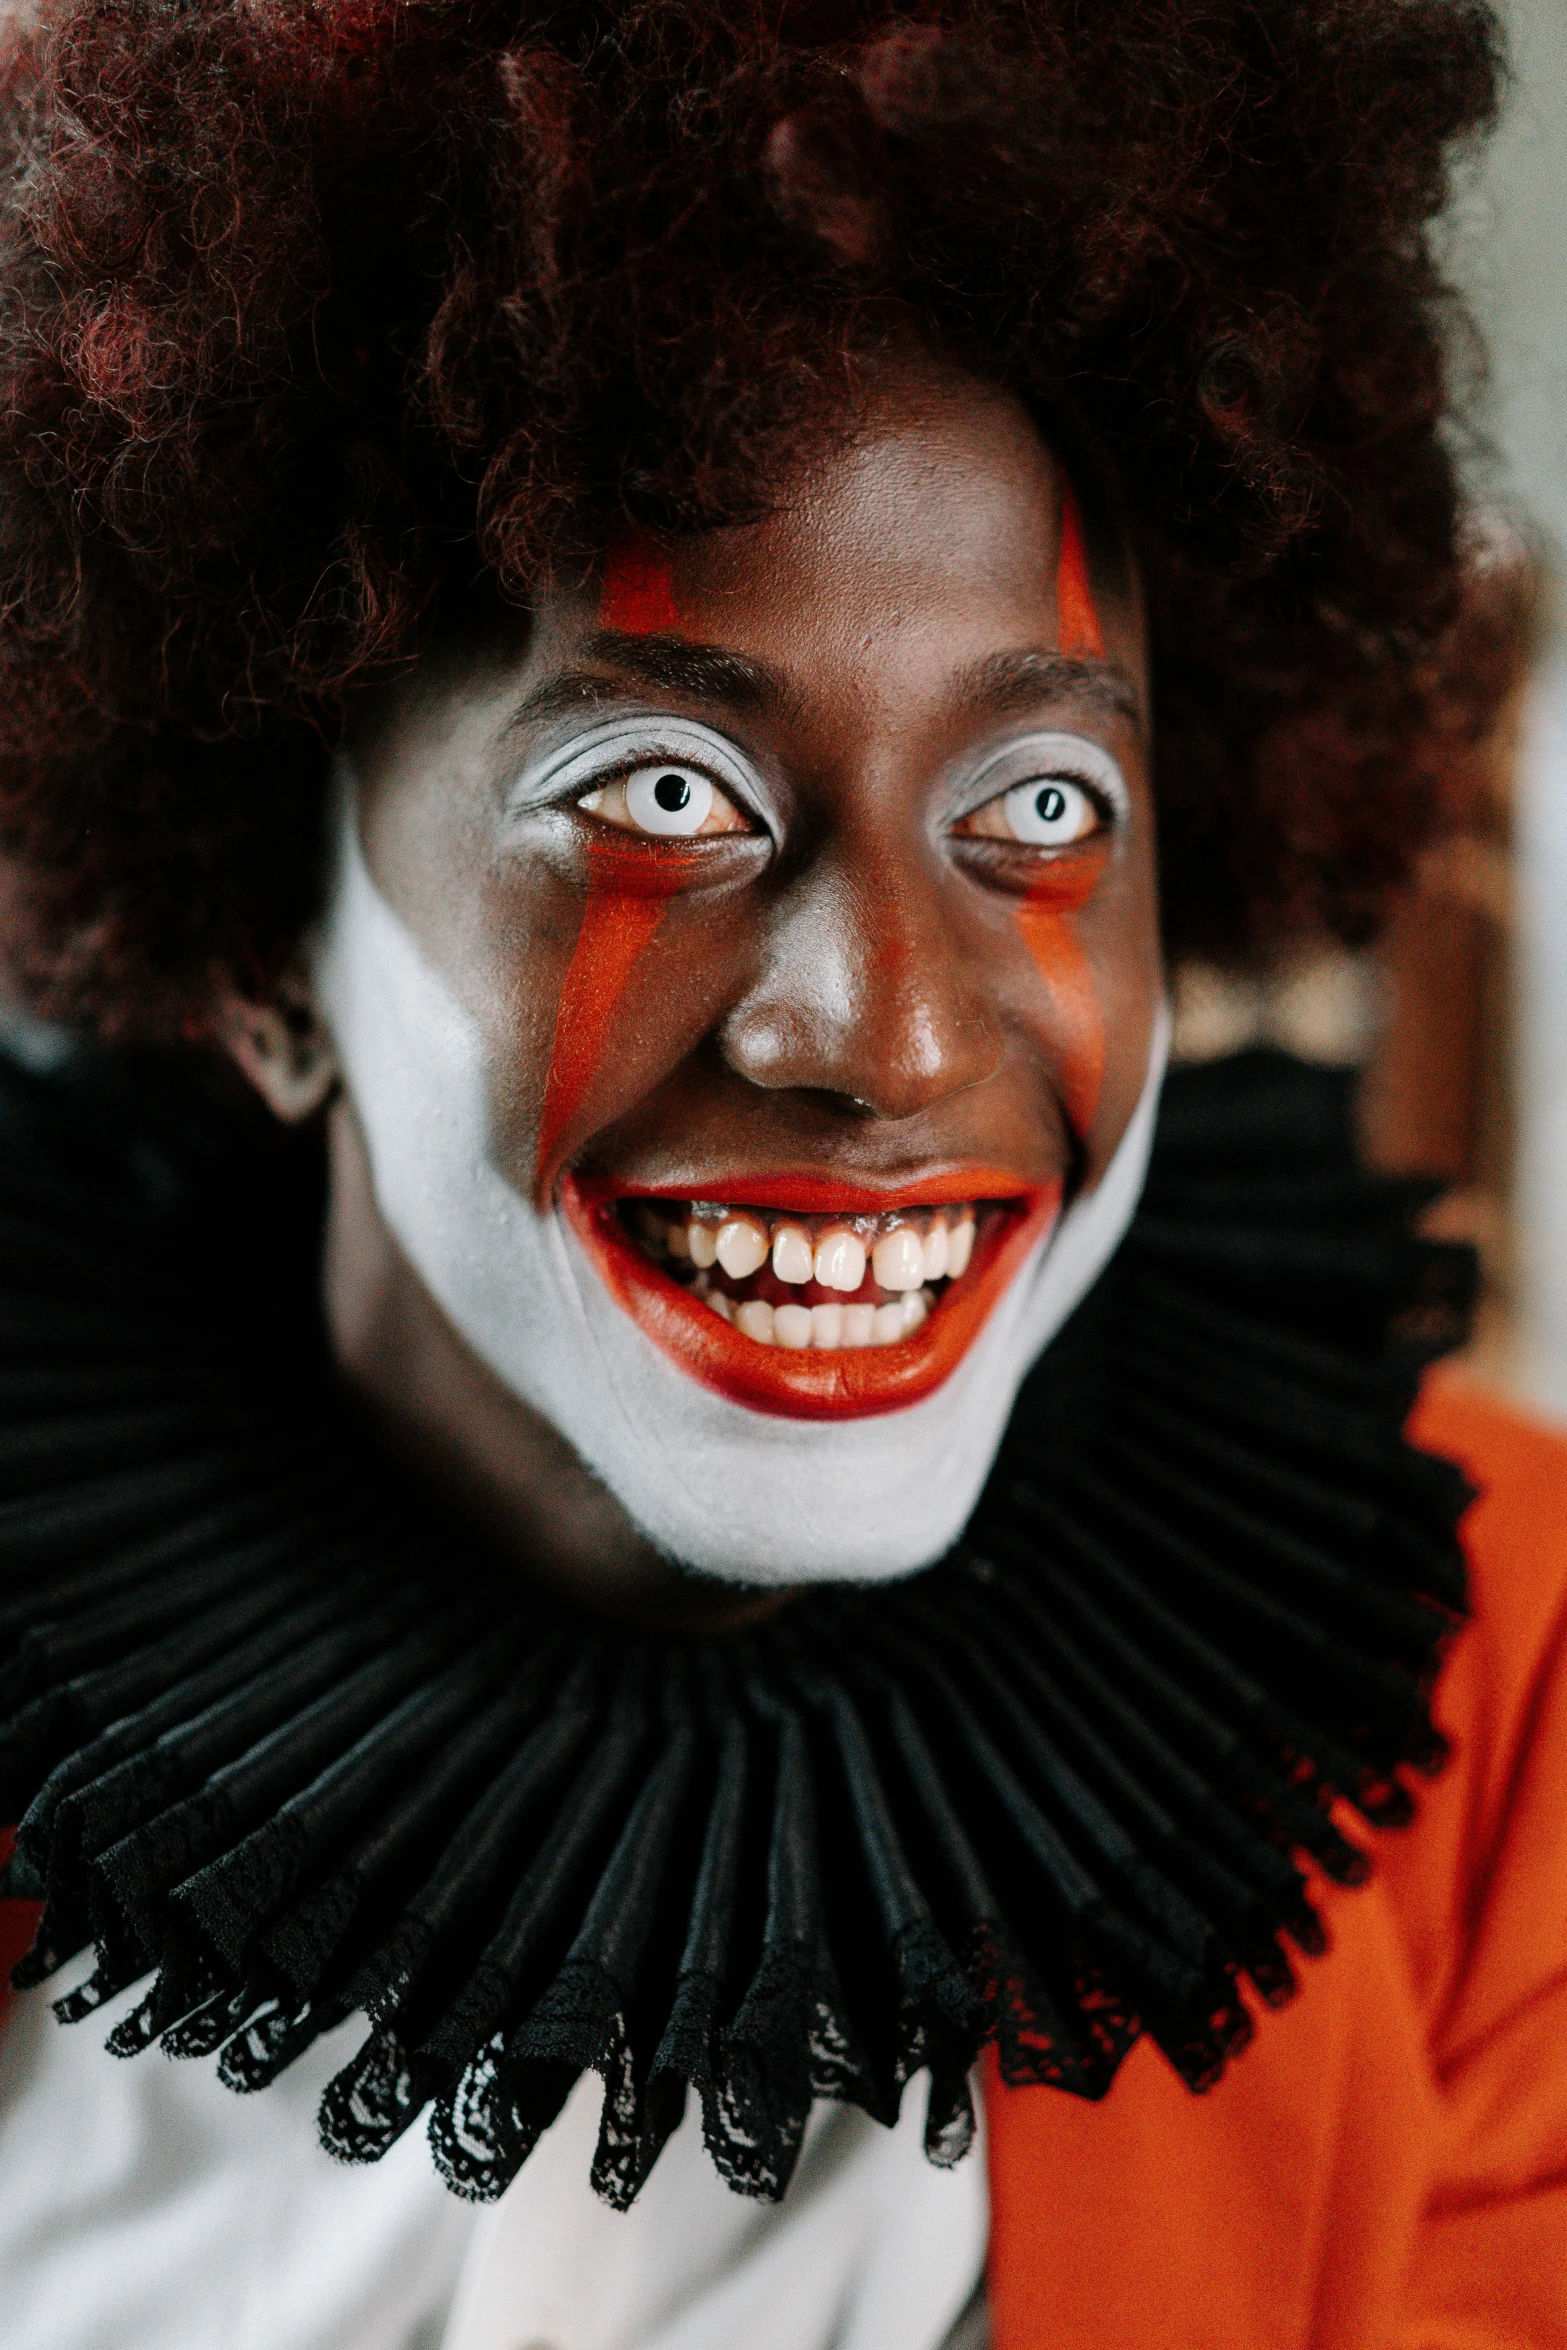 a close up of a person wearing clown makeup, an album cover, pexels contest winner, renaissance, brown skin man with a giant grin, bright orange eyes, black sclera white pupil, clown girl